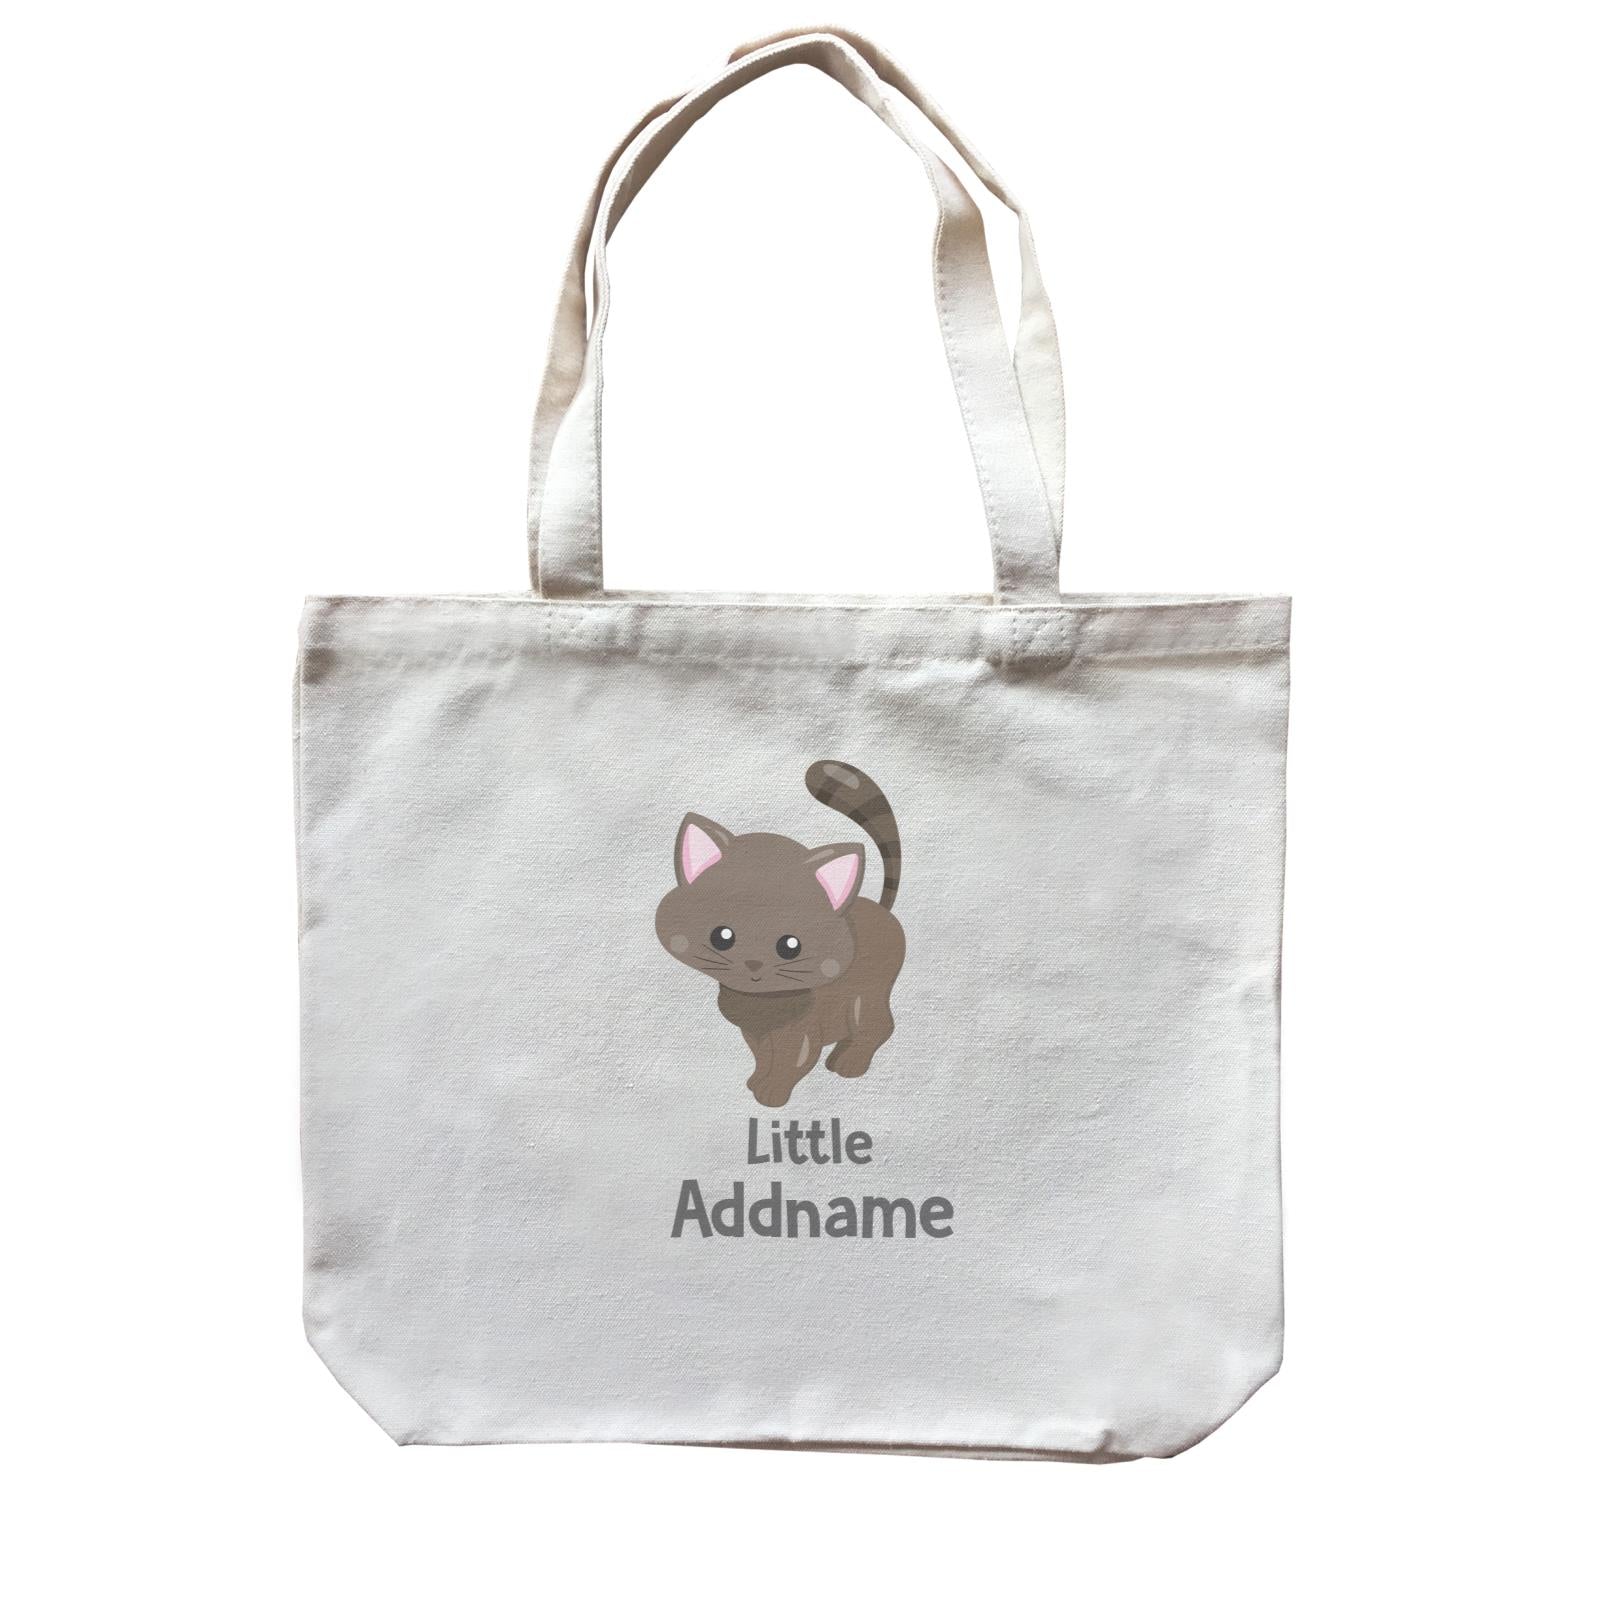 Adorable Cats Dark Brown Cat Little Addname Canvas Bag